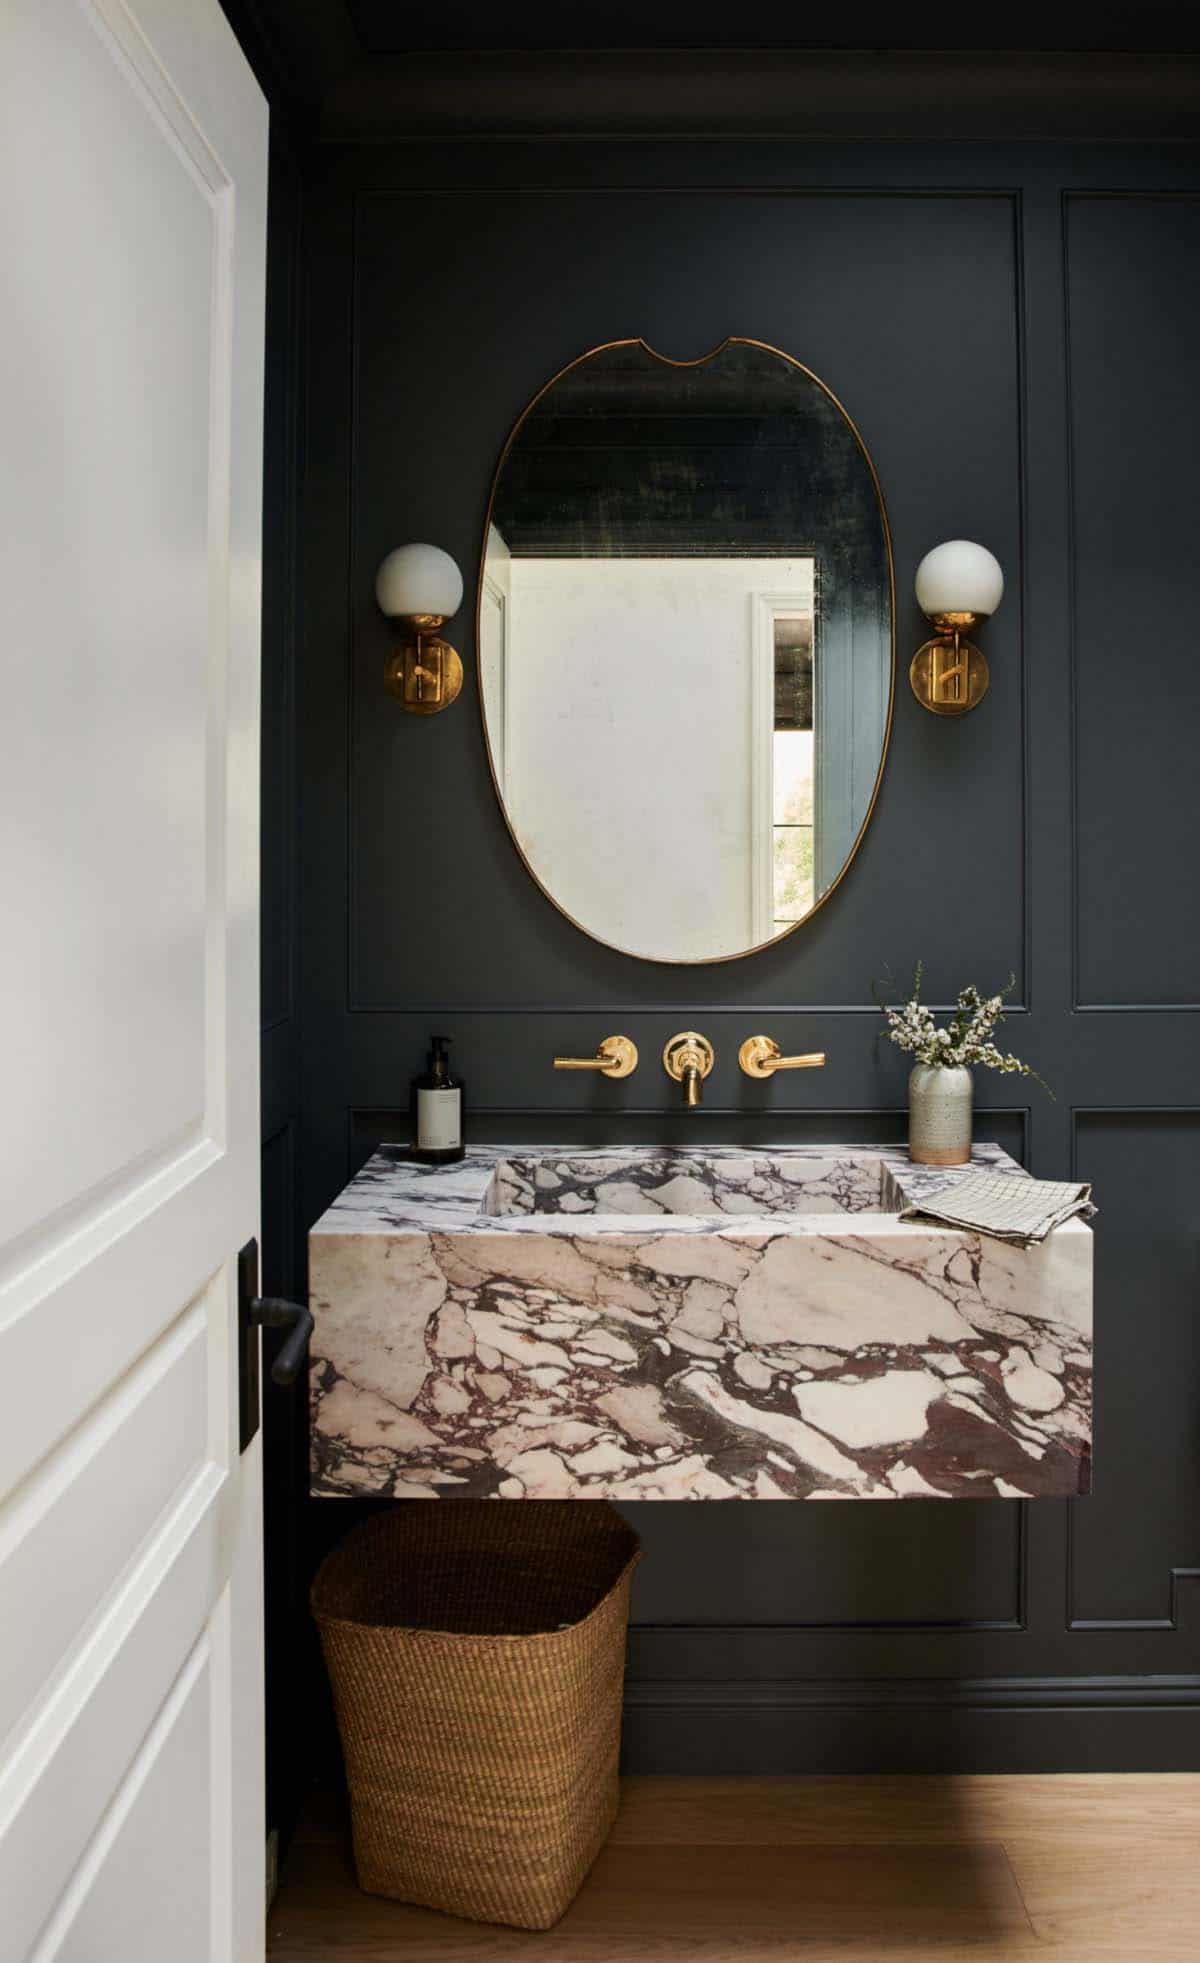 Dark Powder Room Designs - Amber Interiors - Best Paint Color for Small Rooms